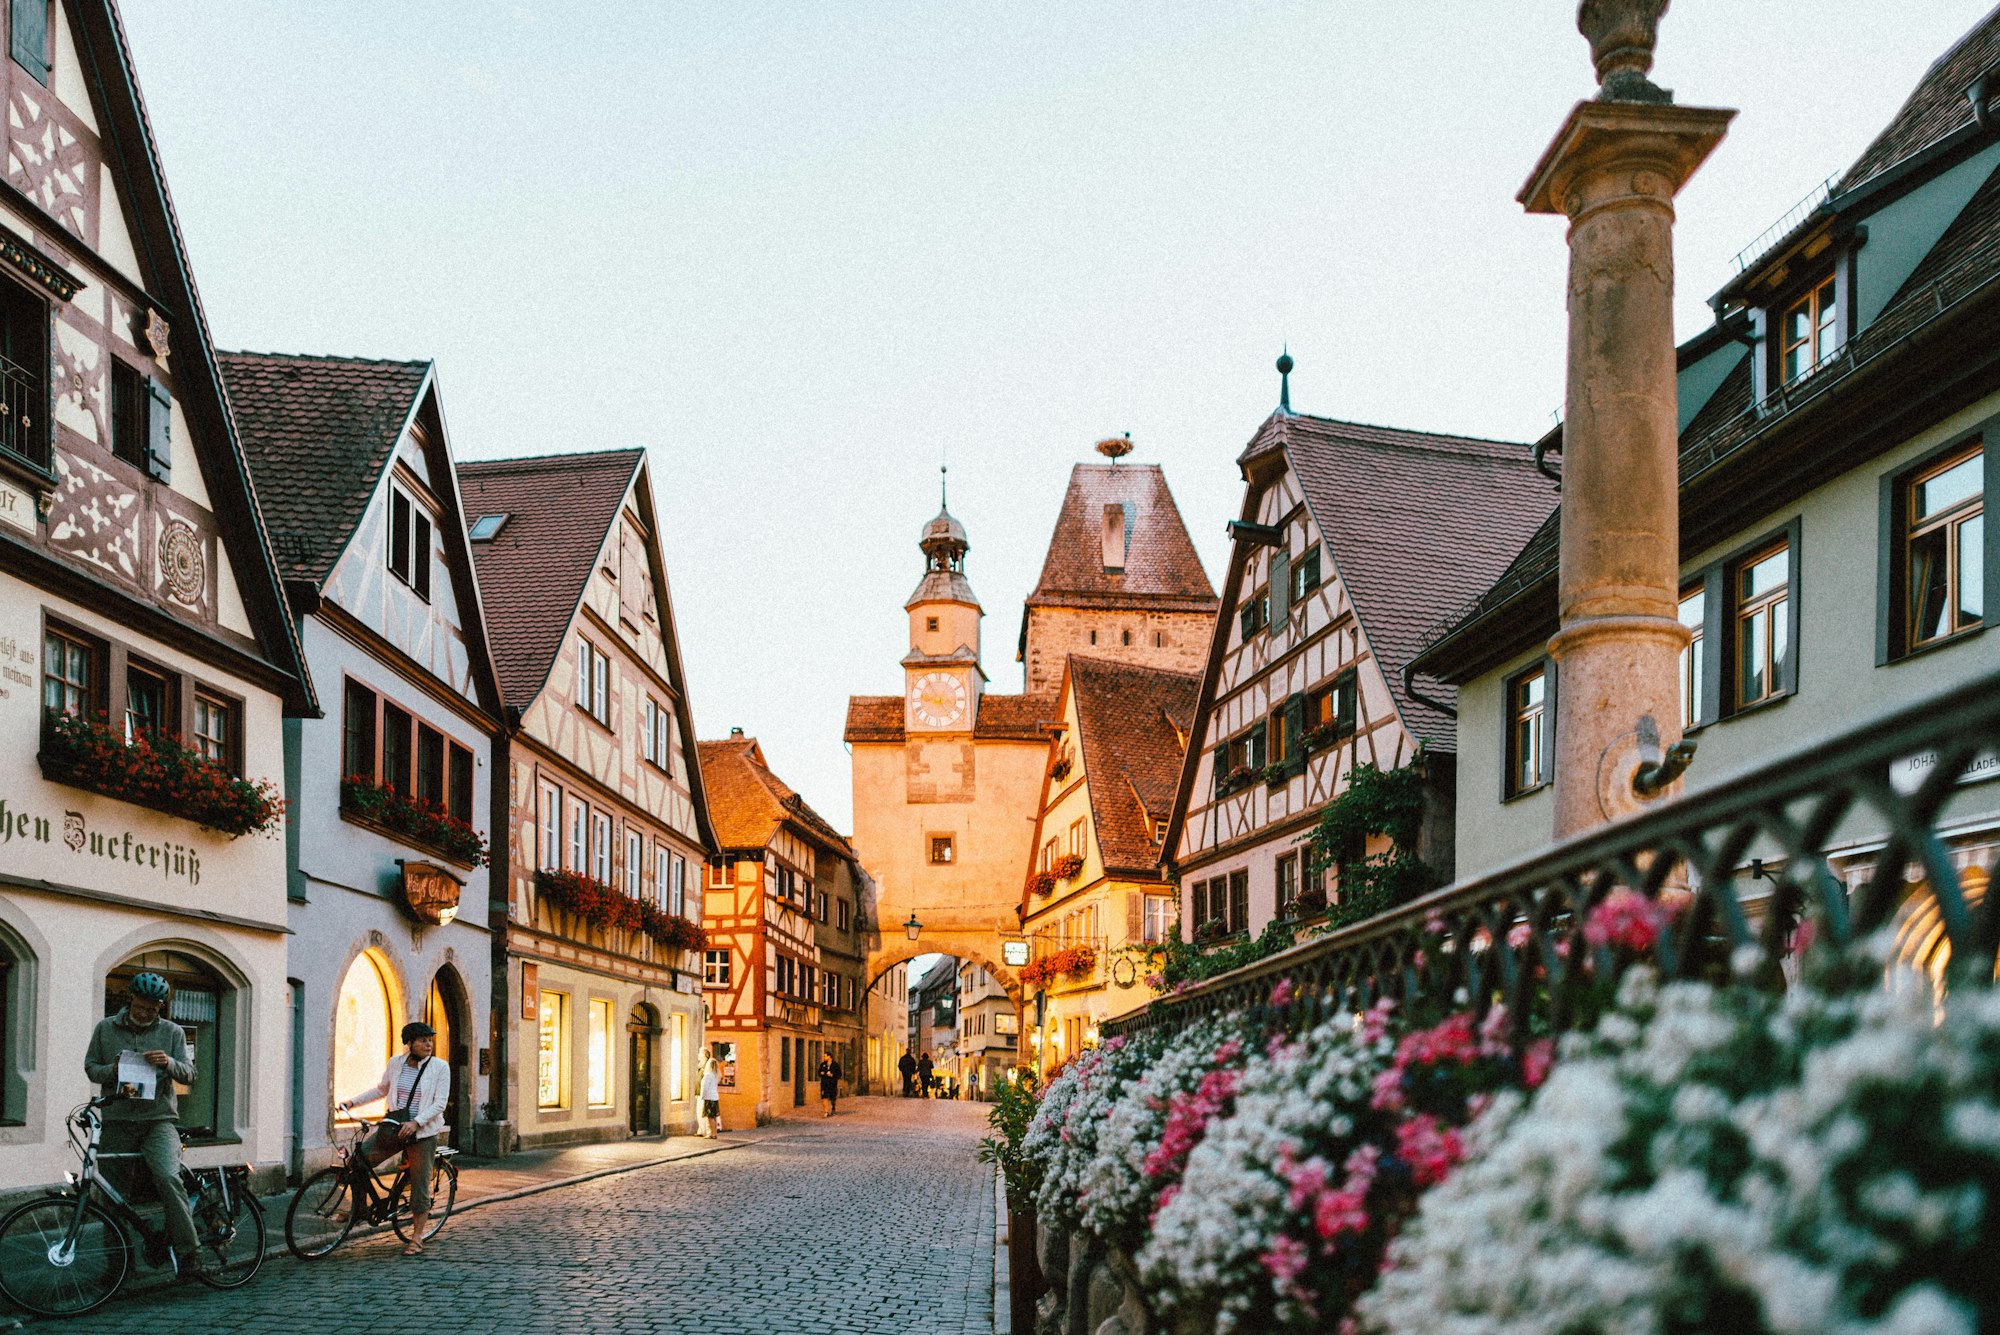 Picture of a German town